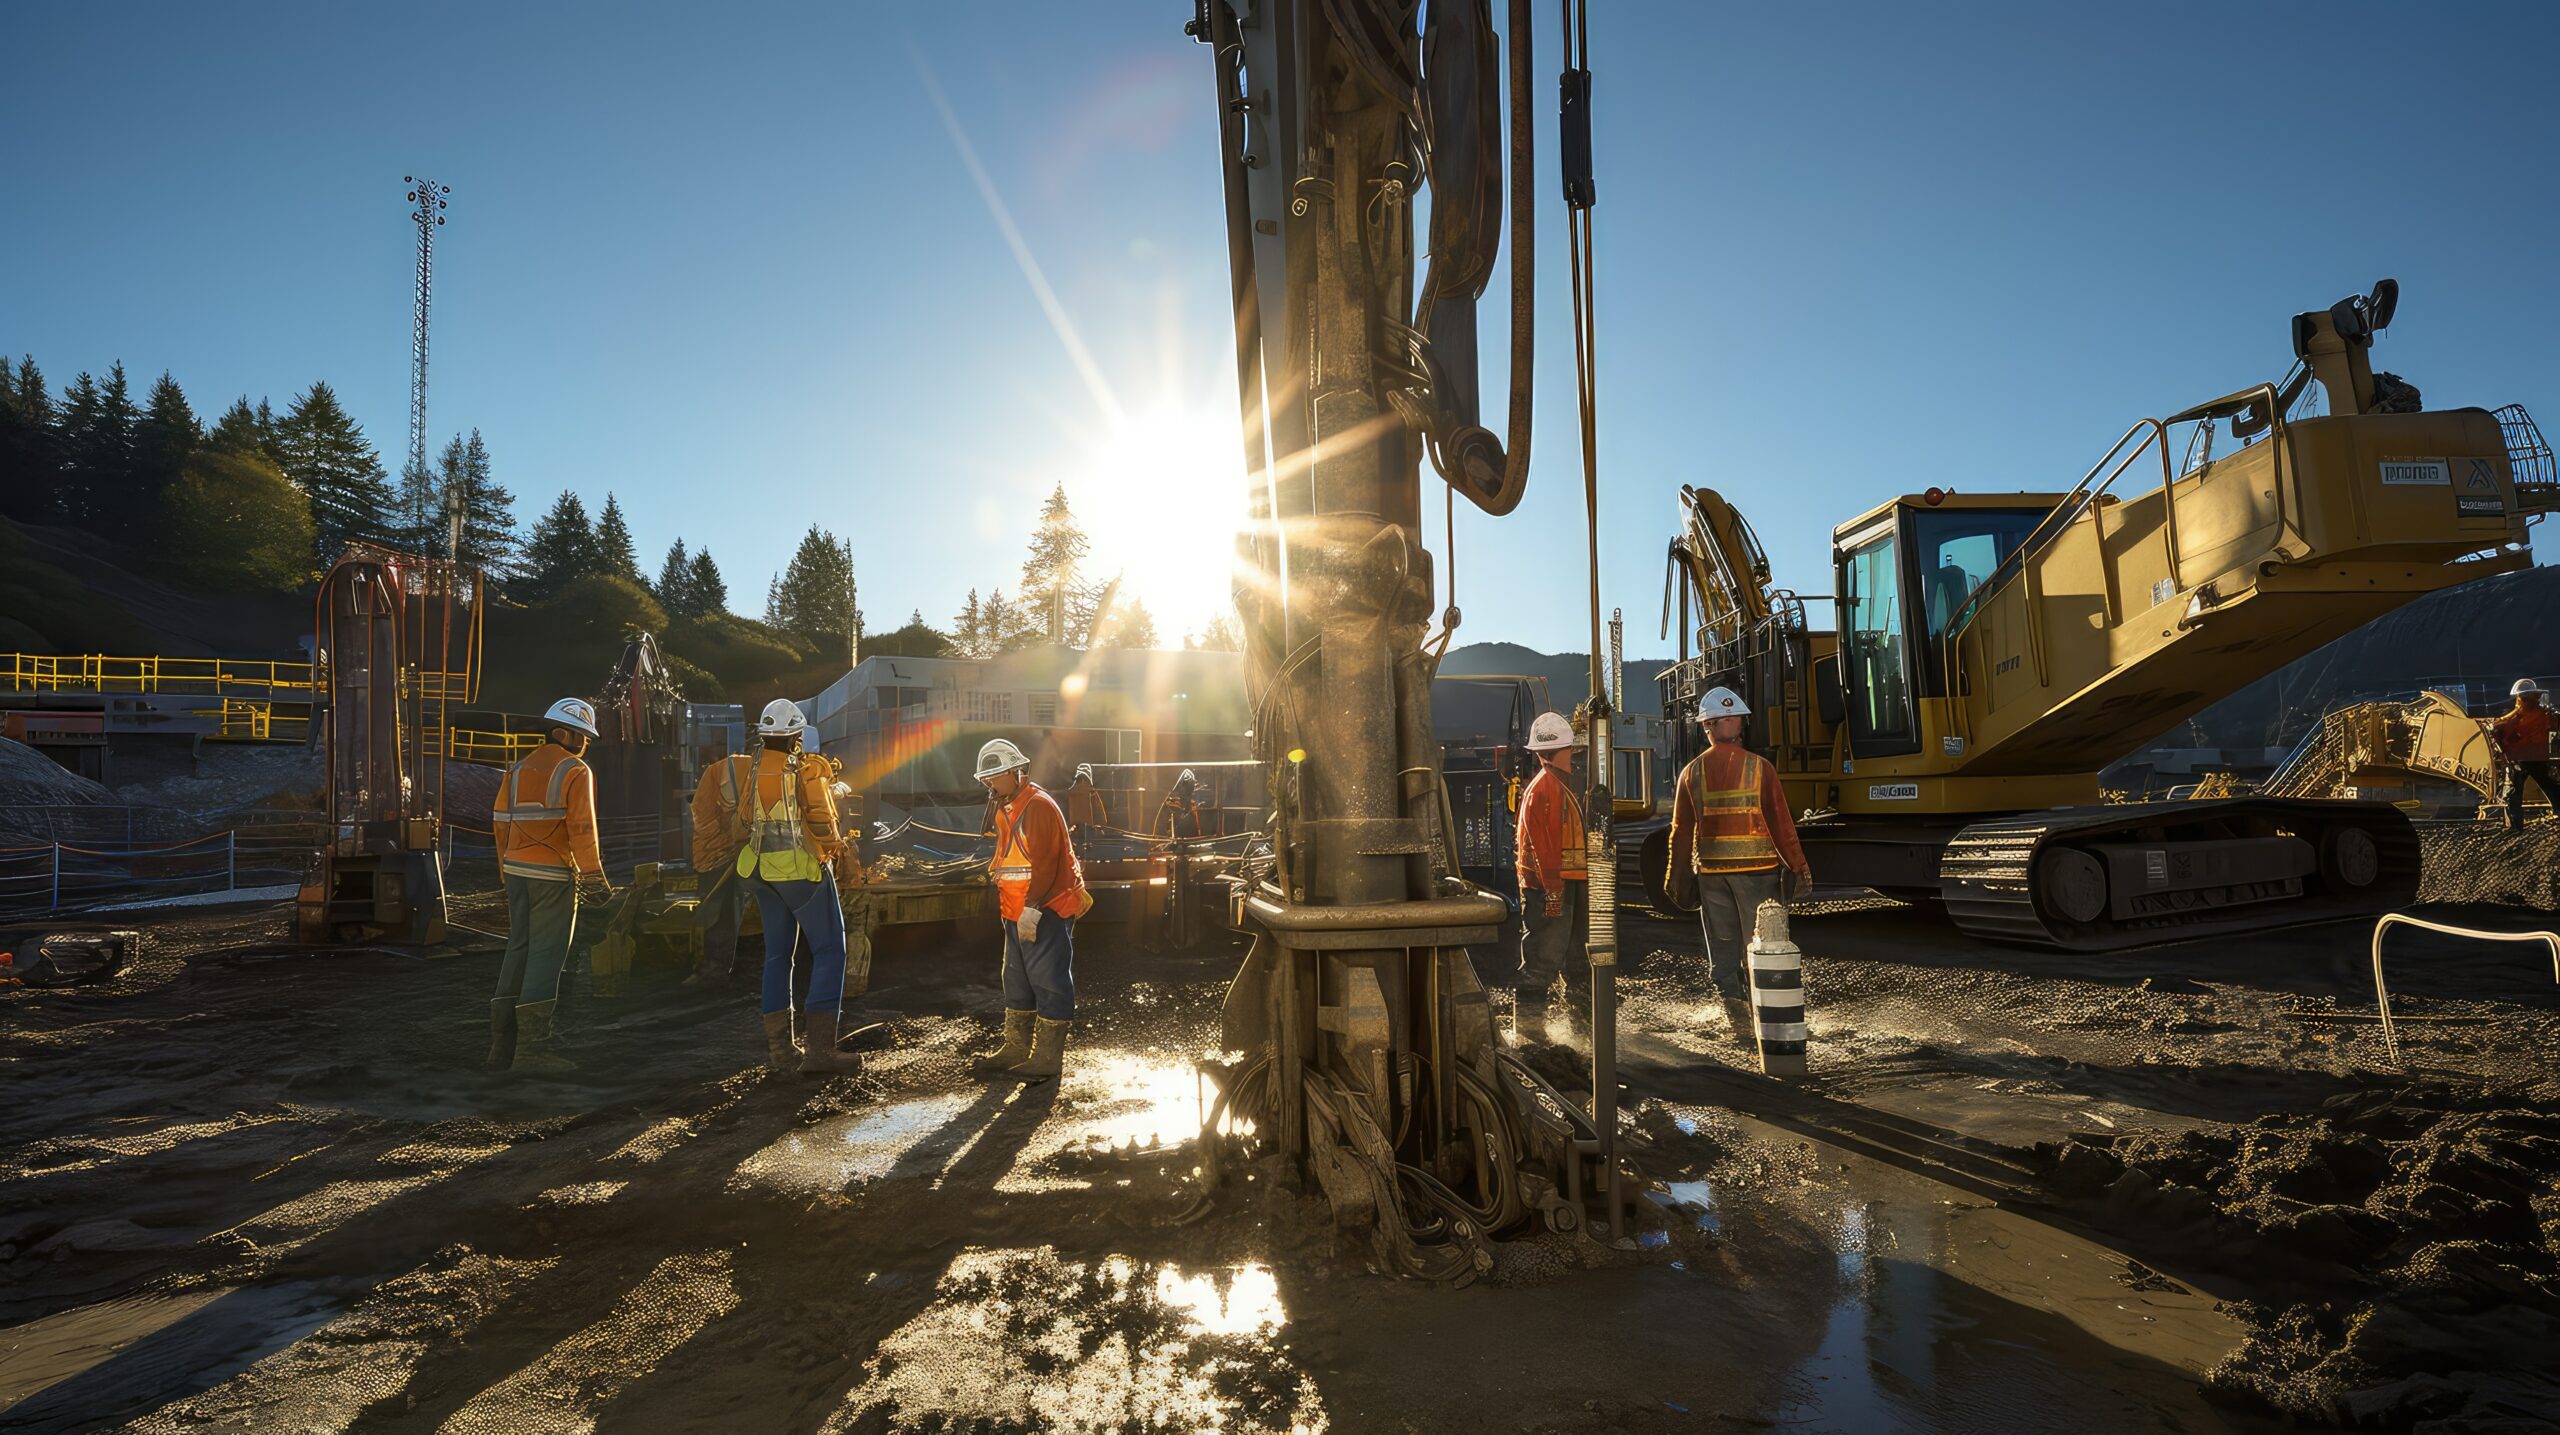 Construction workers operate drilling machinery at a sunlit construction site.